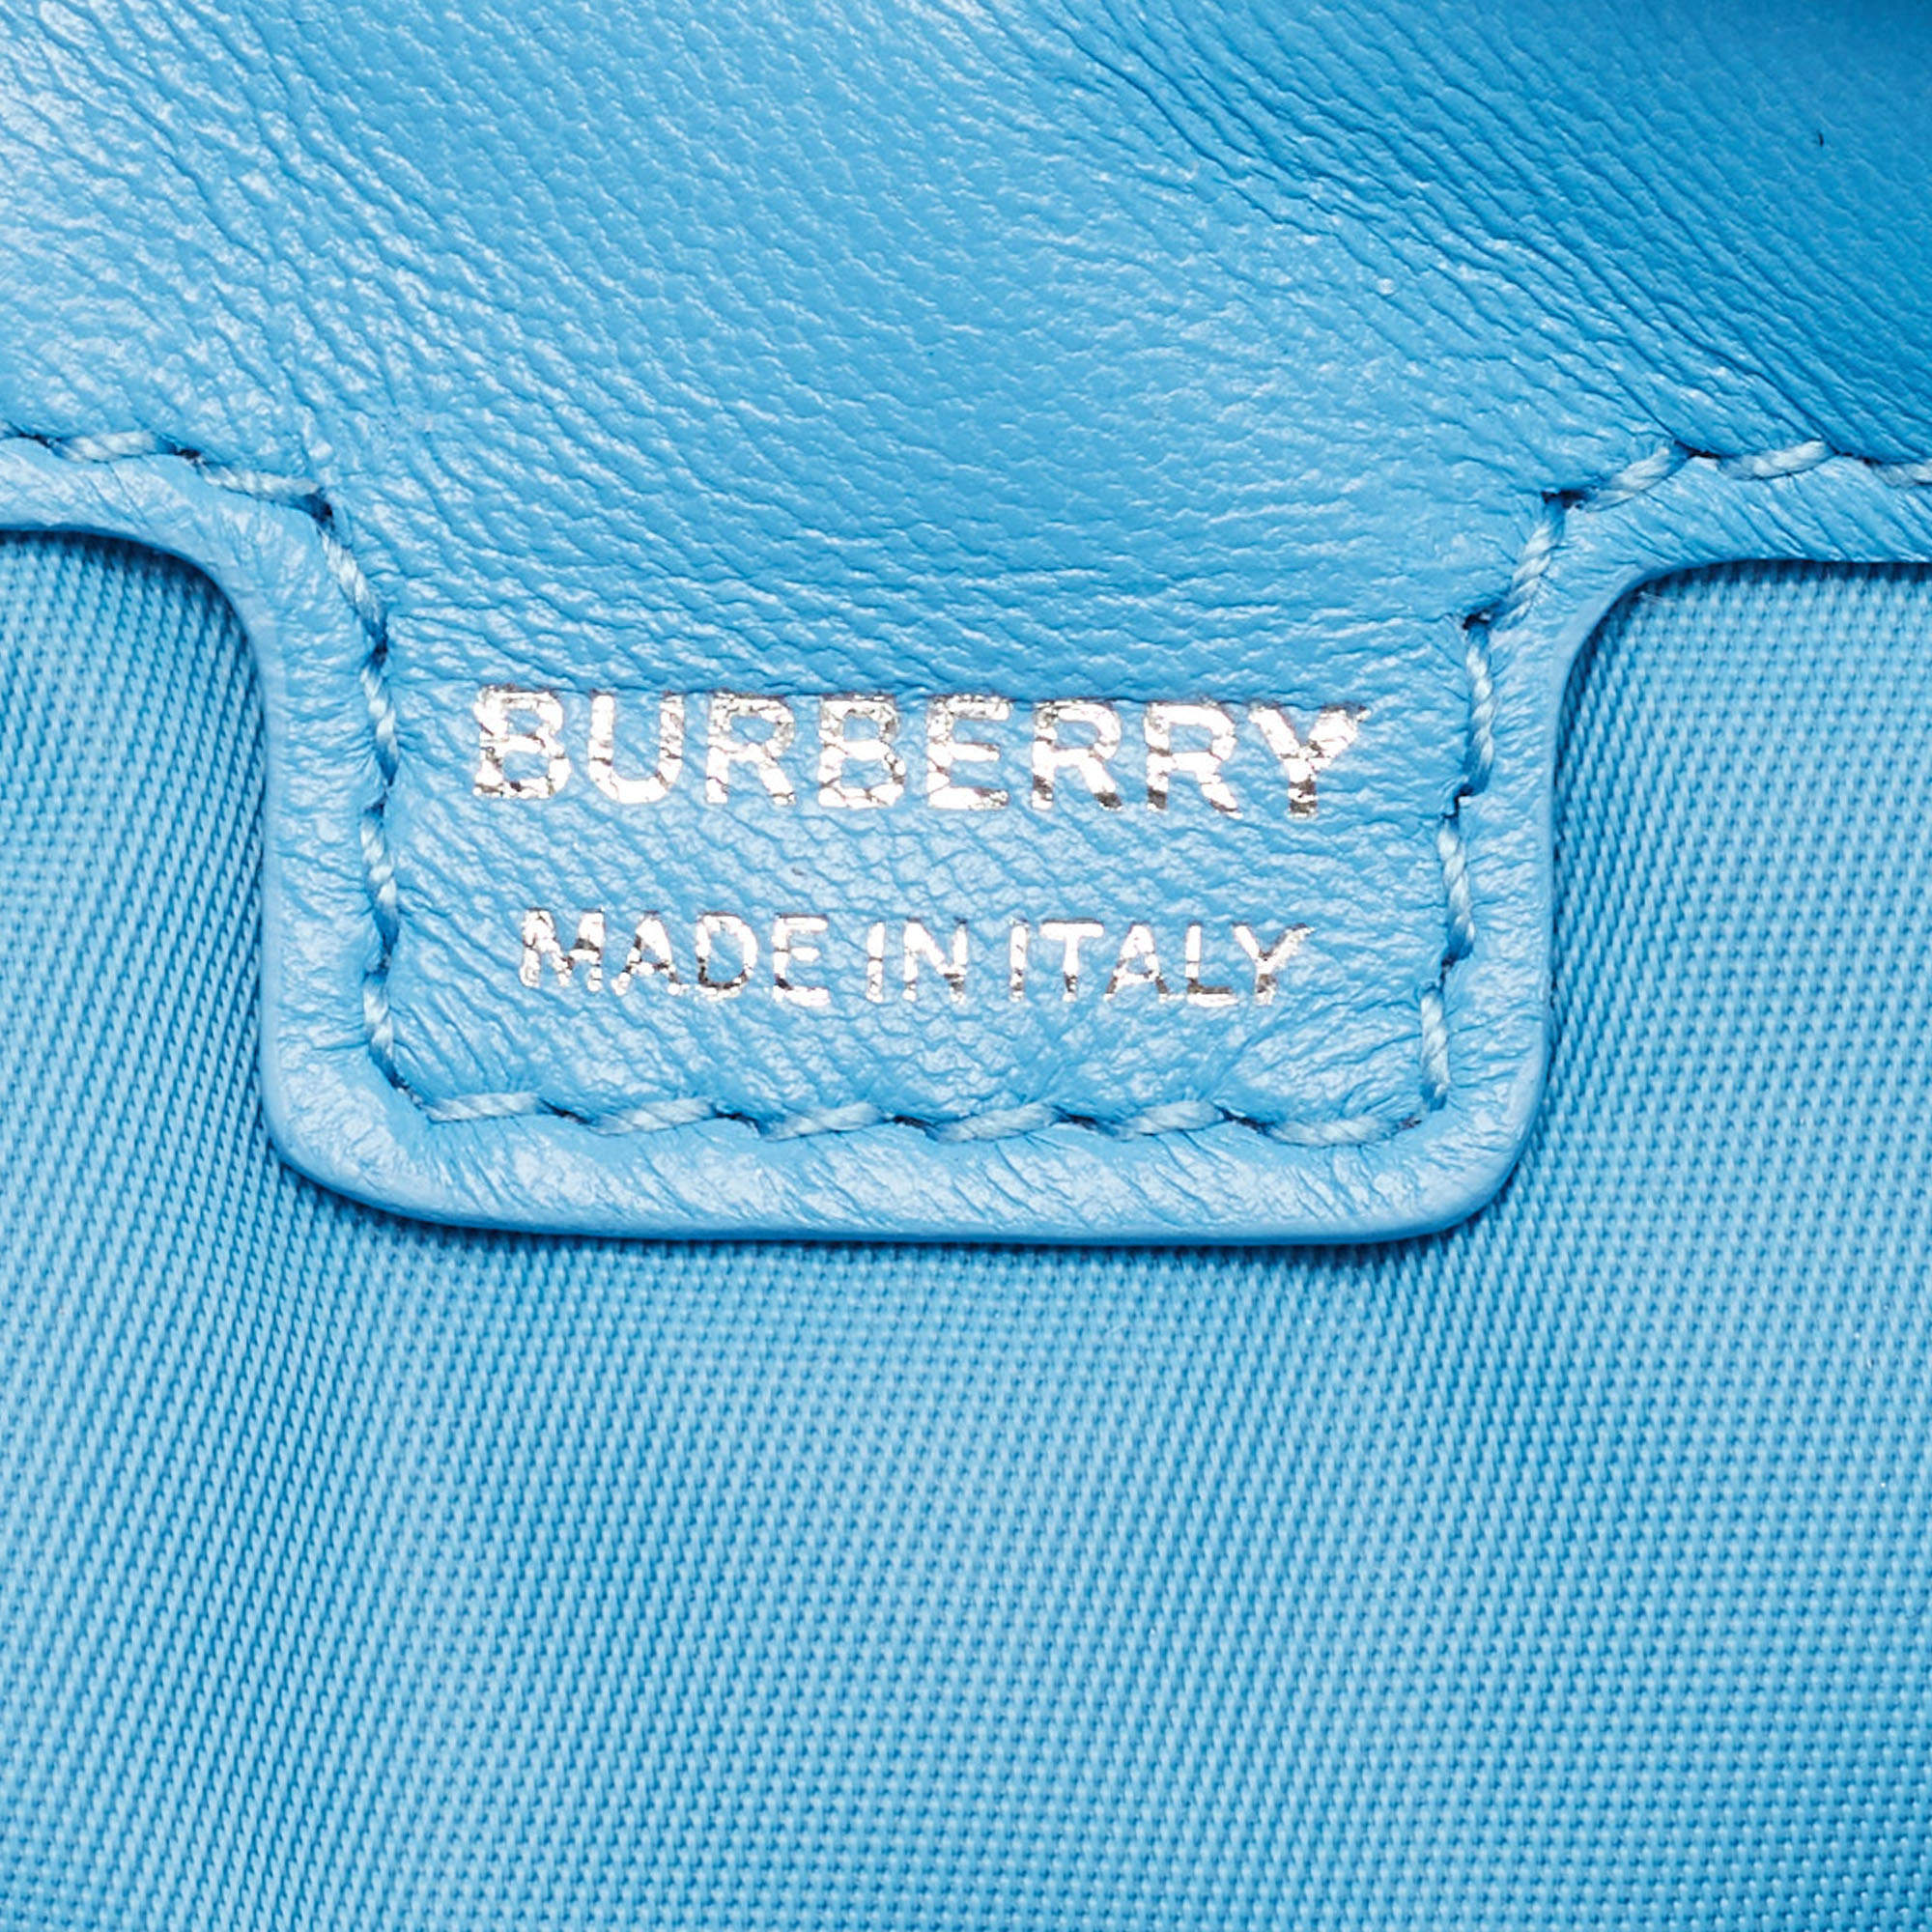 Burberry Lola Double Pouch Bag in Blue